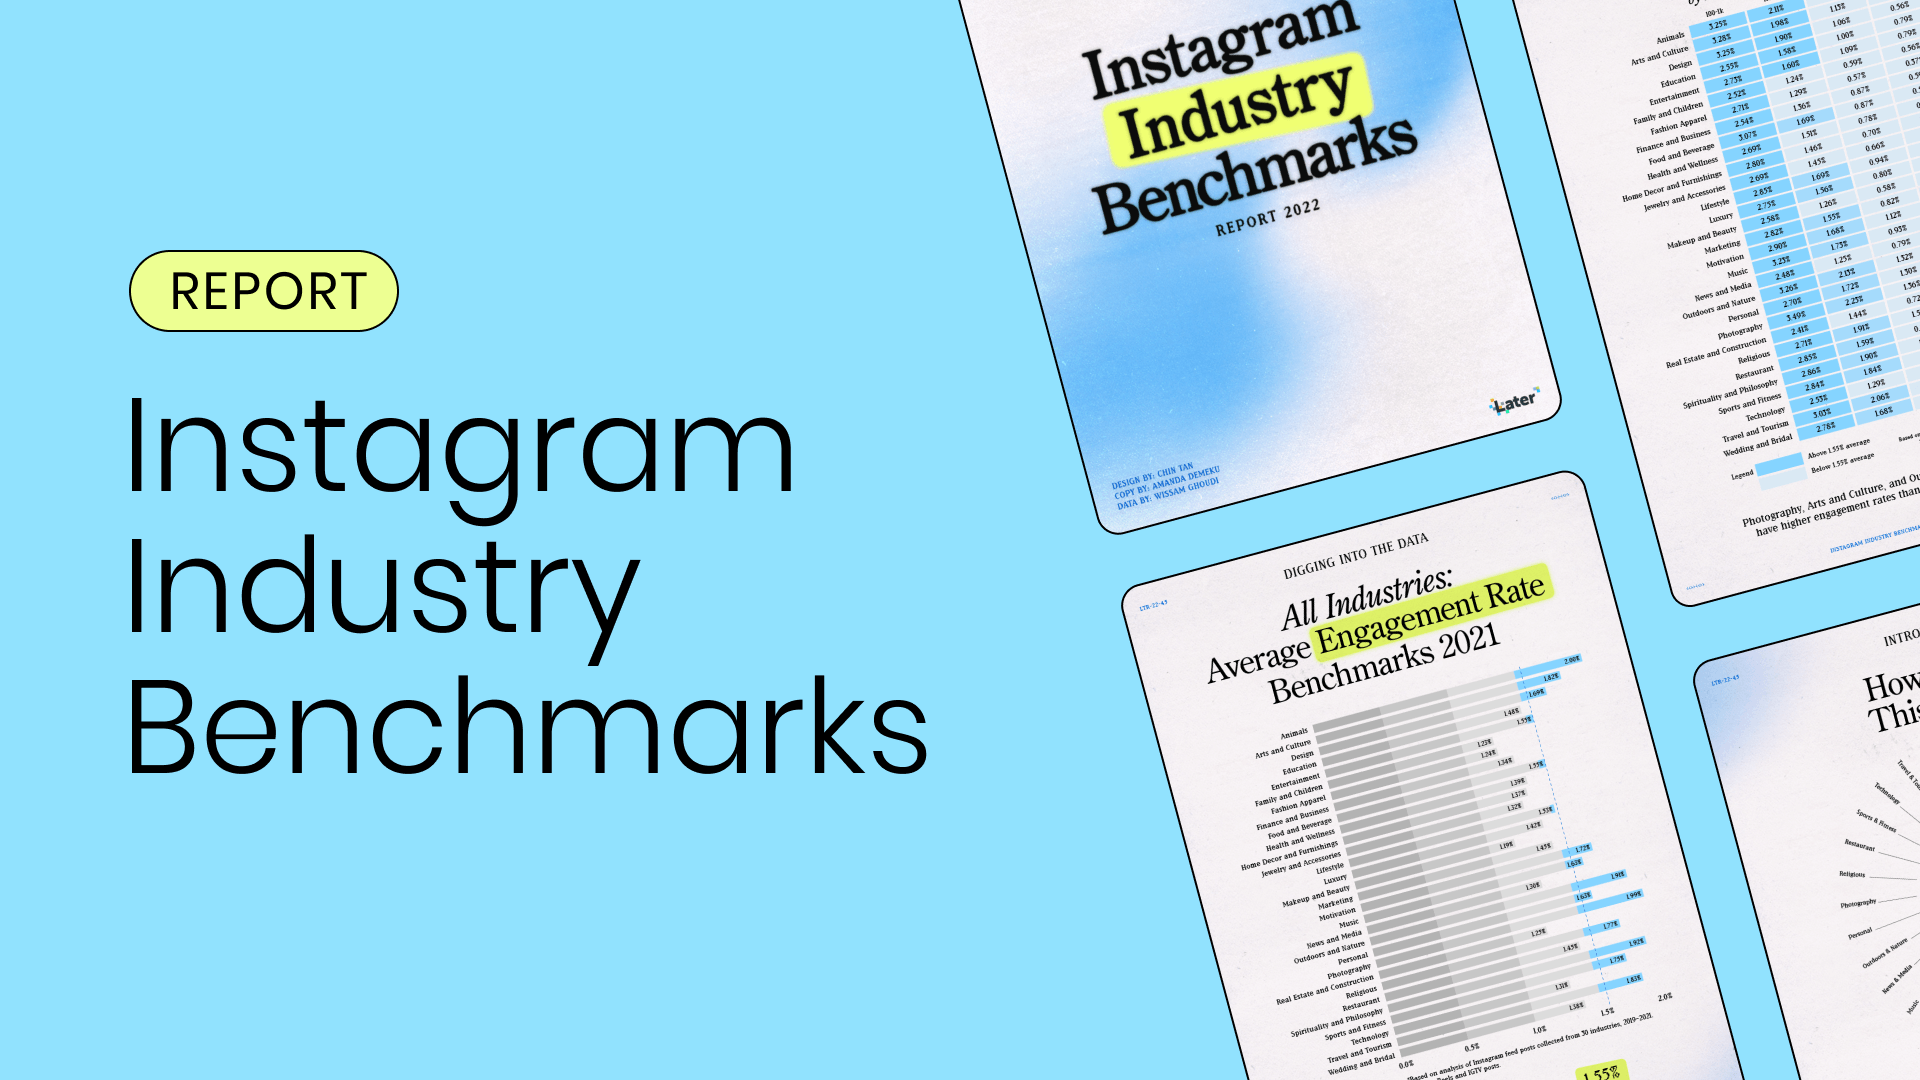 Thumbnail image reading Report Instagram Industry Benchmarks with graphic of report pages